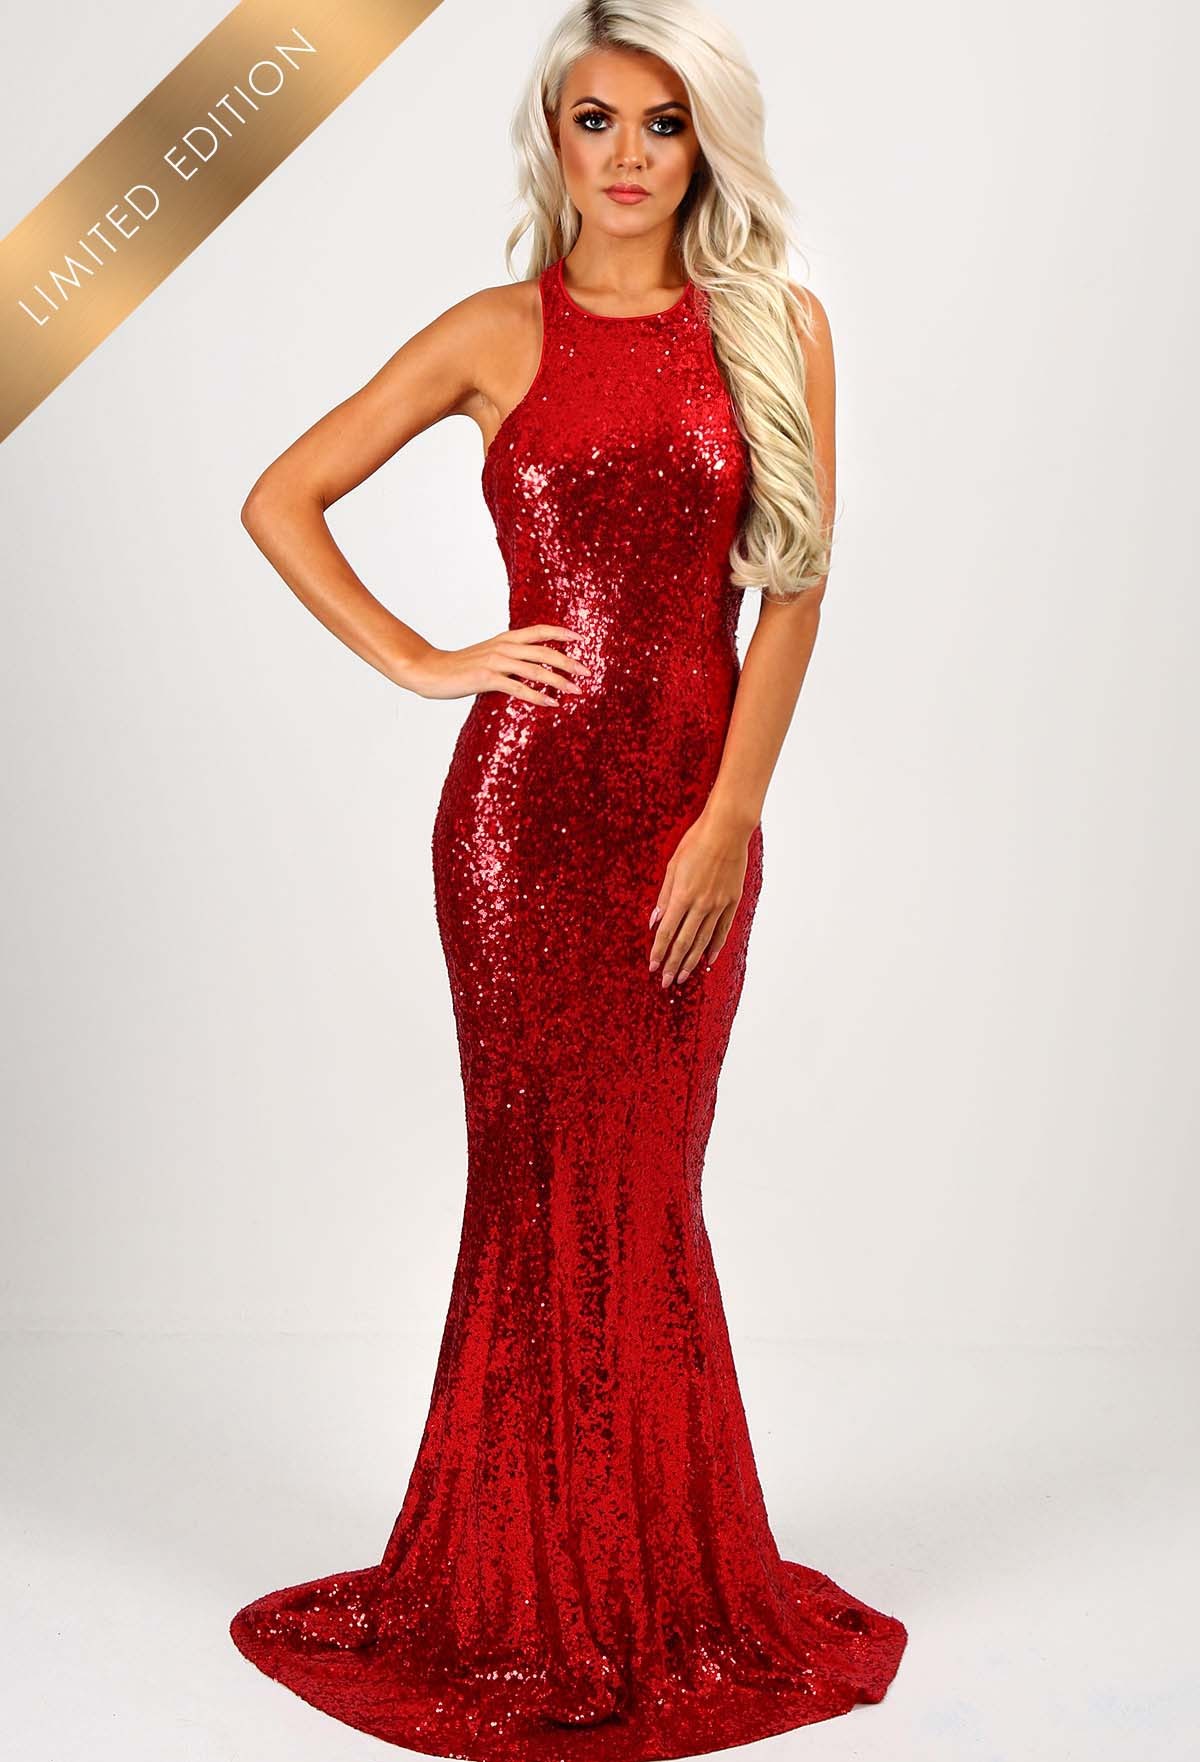 Red Sequin Backless Dress & How To Look Good 2017-2018